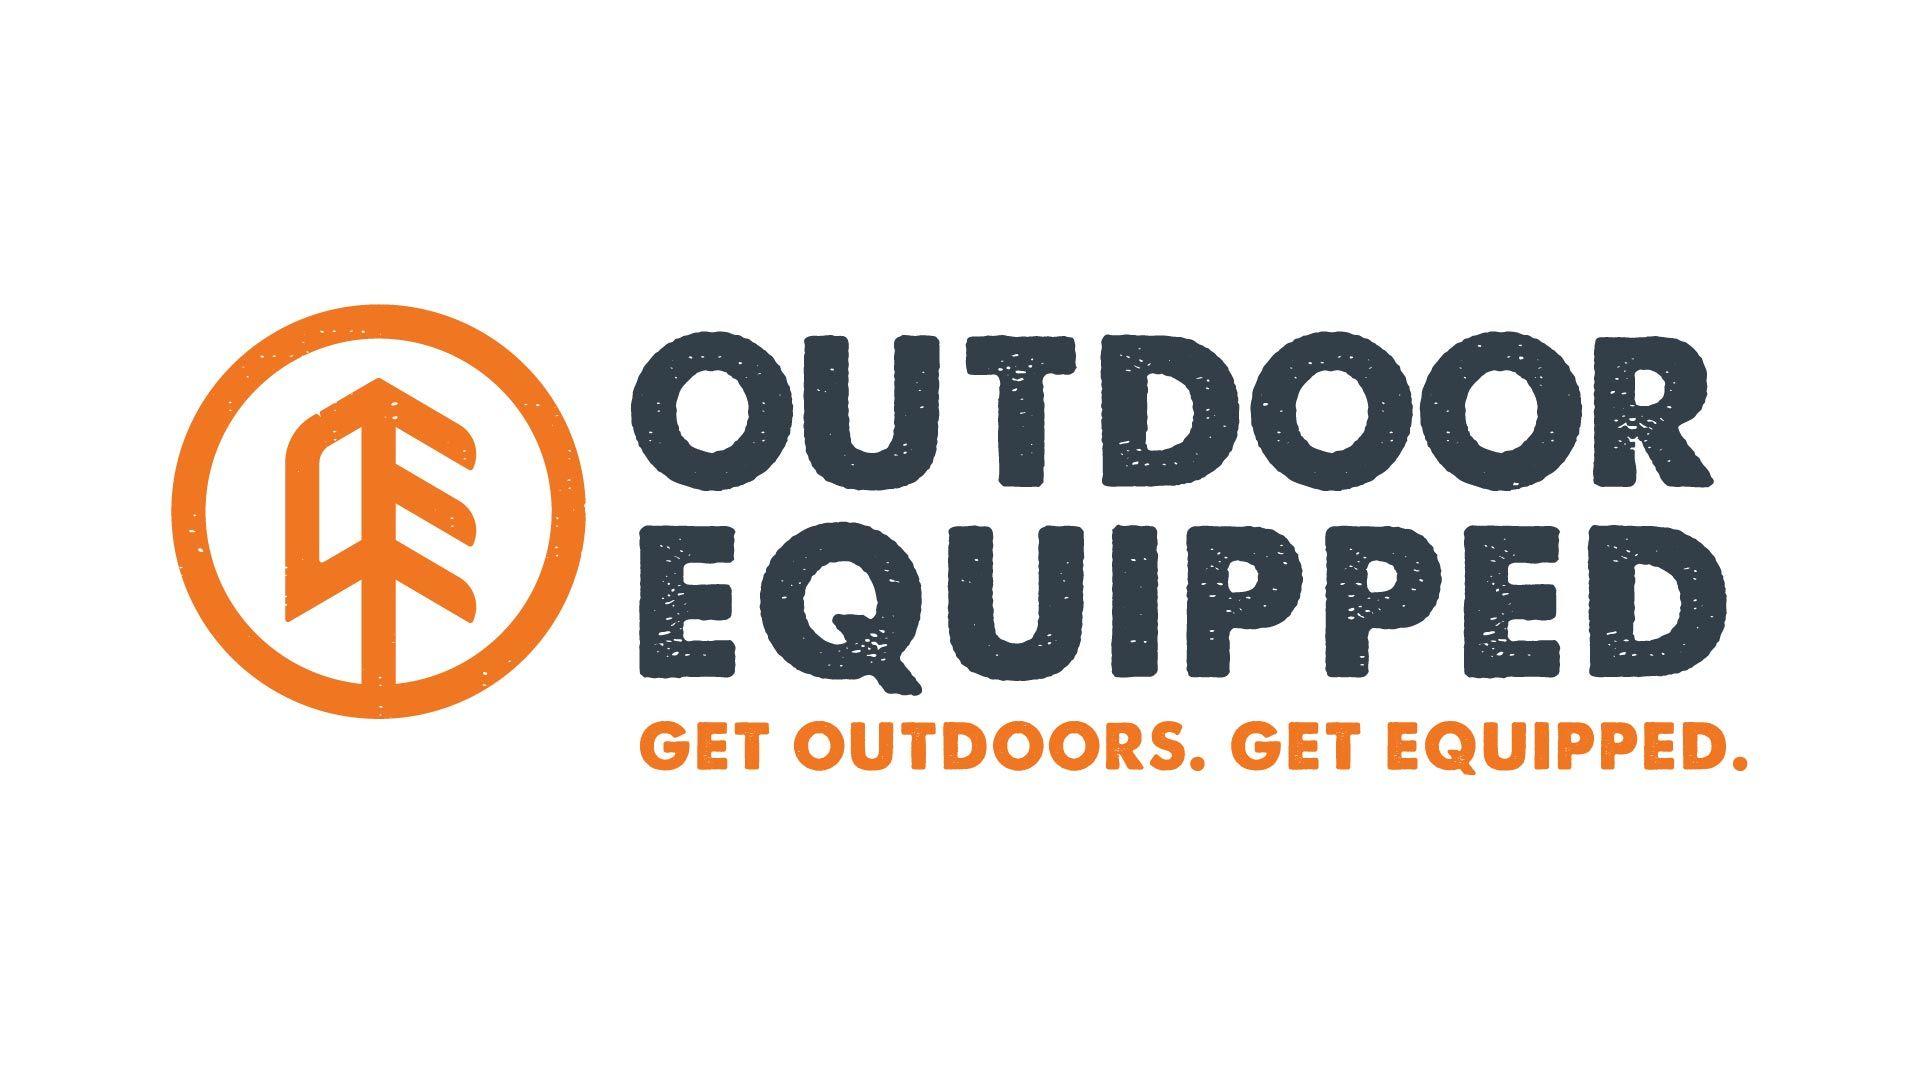 Outdoor Store Logo - Outdoor Equipped Brand Identity